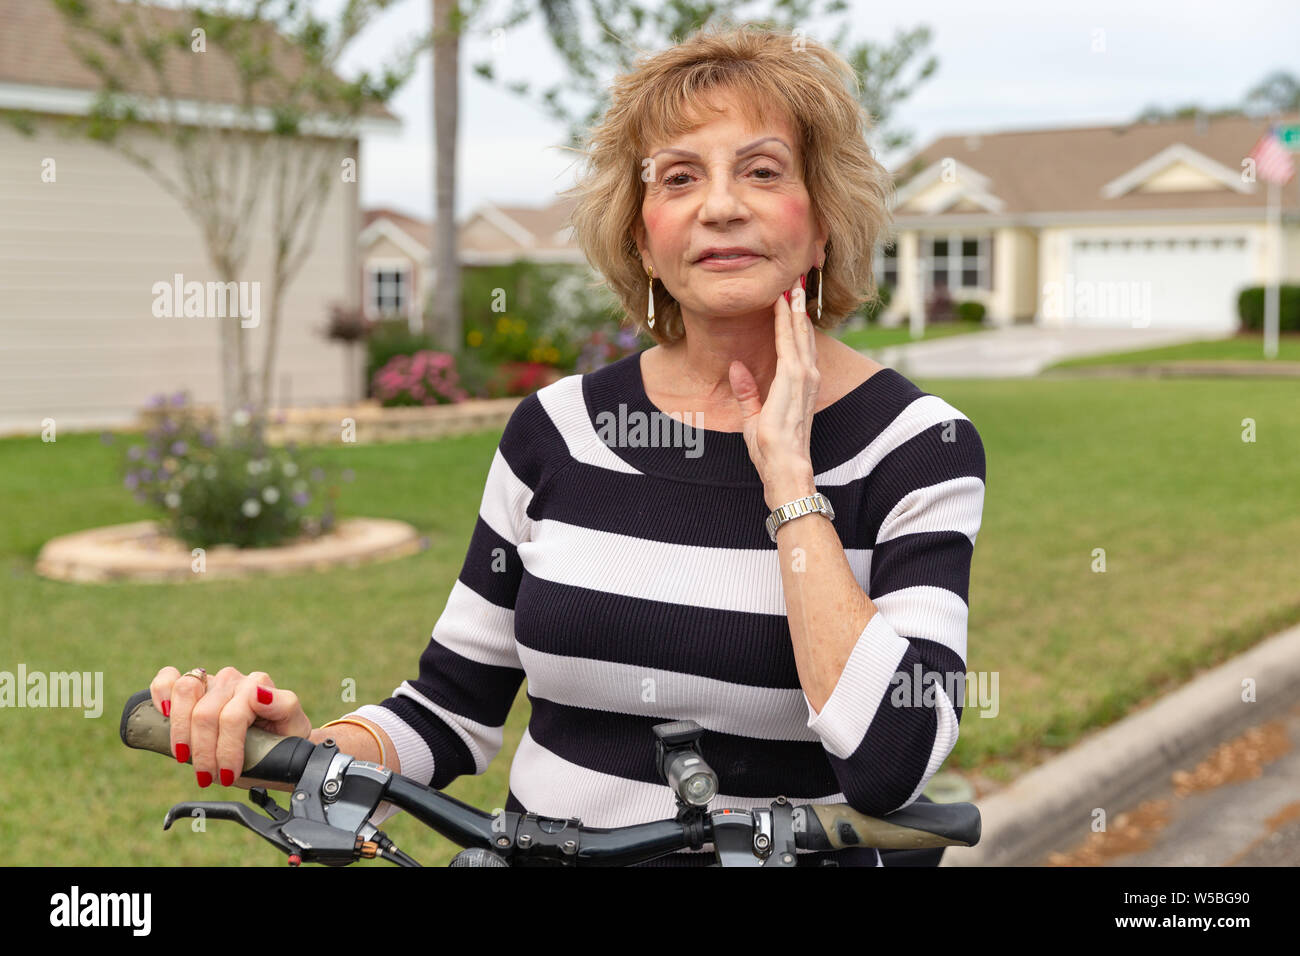 Mature woman in her seventies enjoying a day outside on her bike. Stock Photo